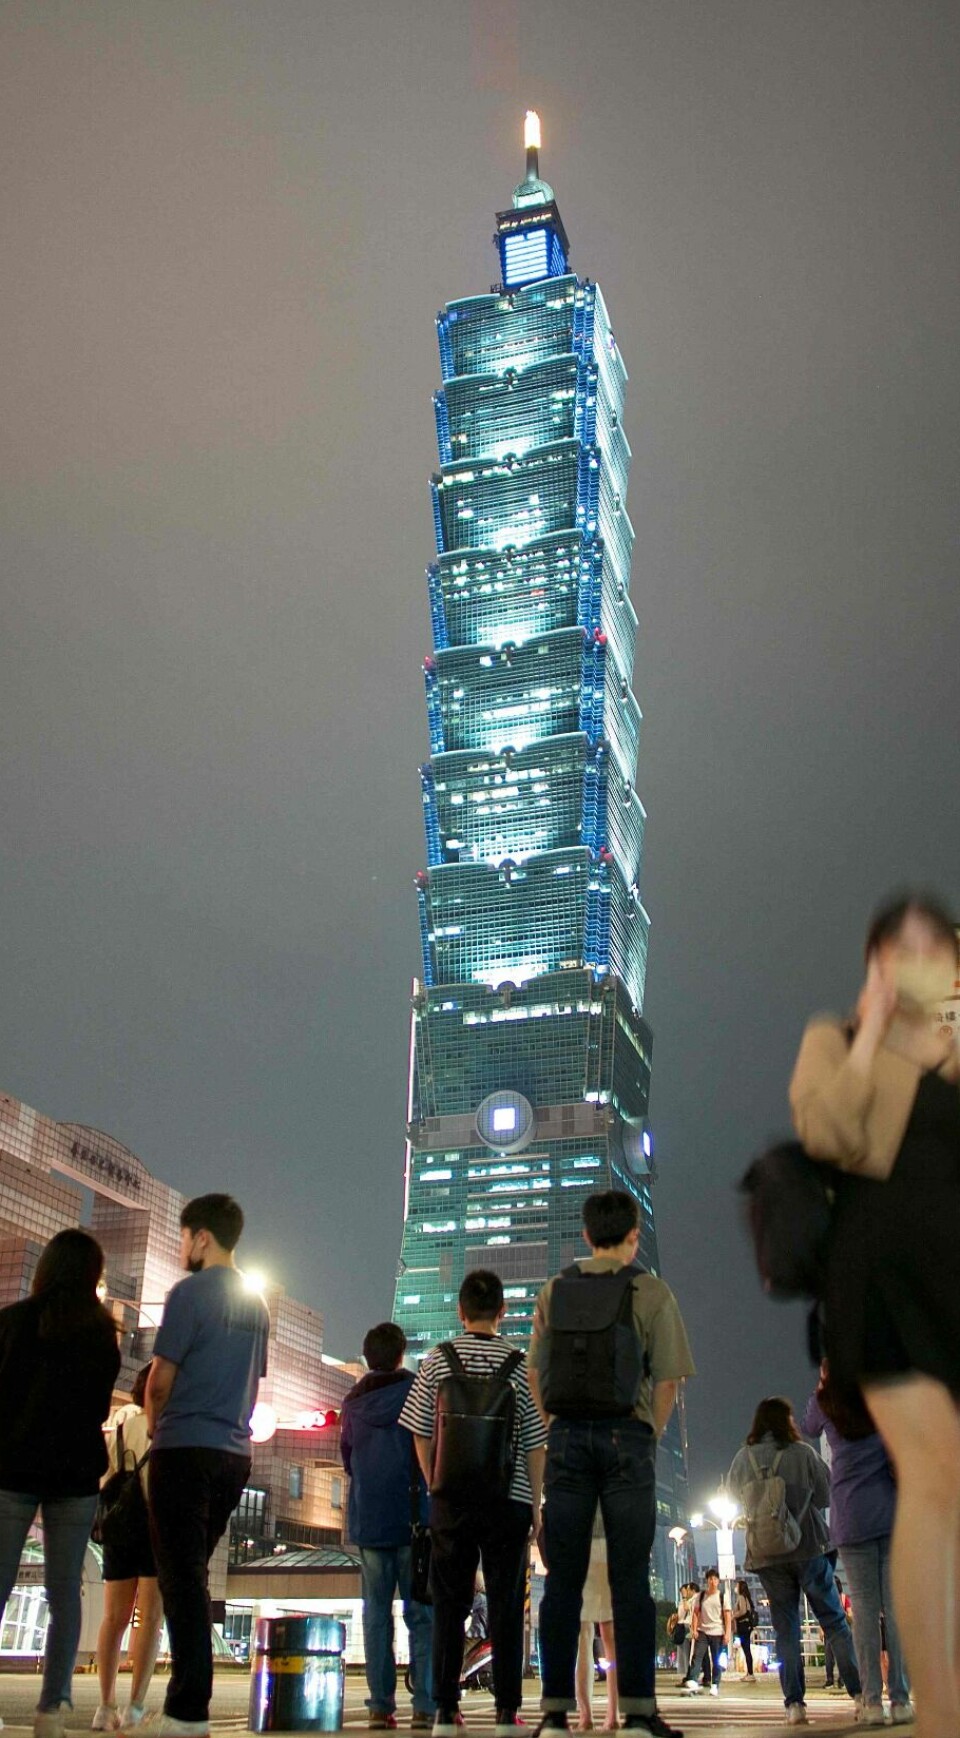 People walk past the Taipei 101 skyscraper in Taipei on April 28, 2023. (Photo by Sam Yeh / AFP)